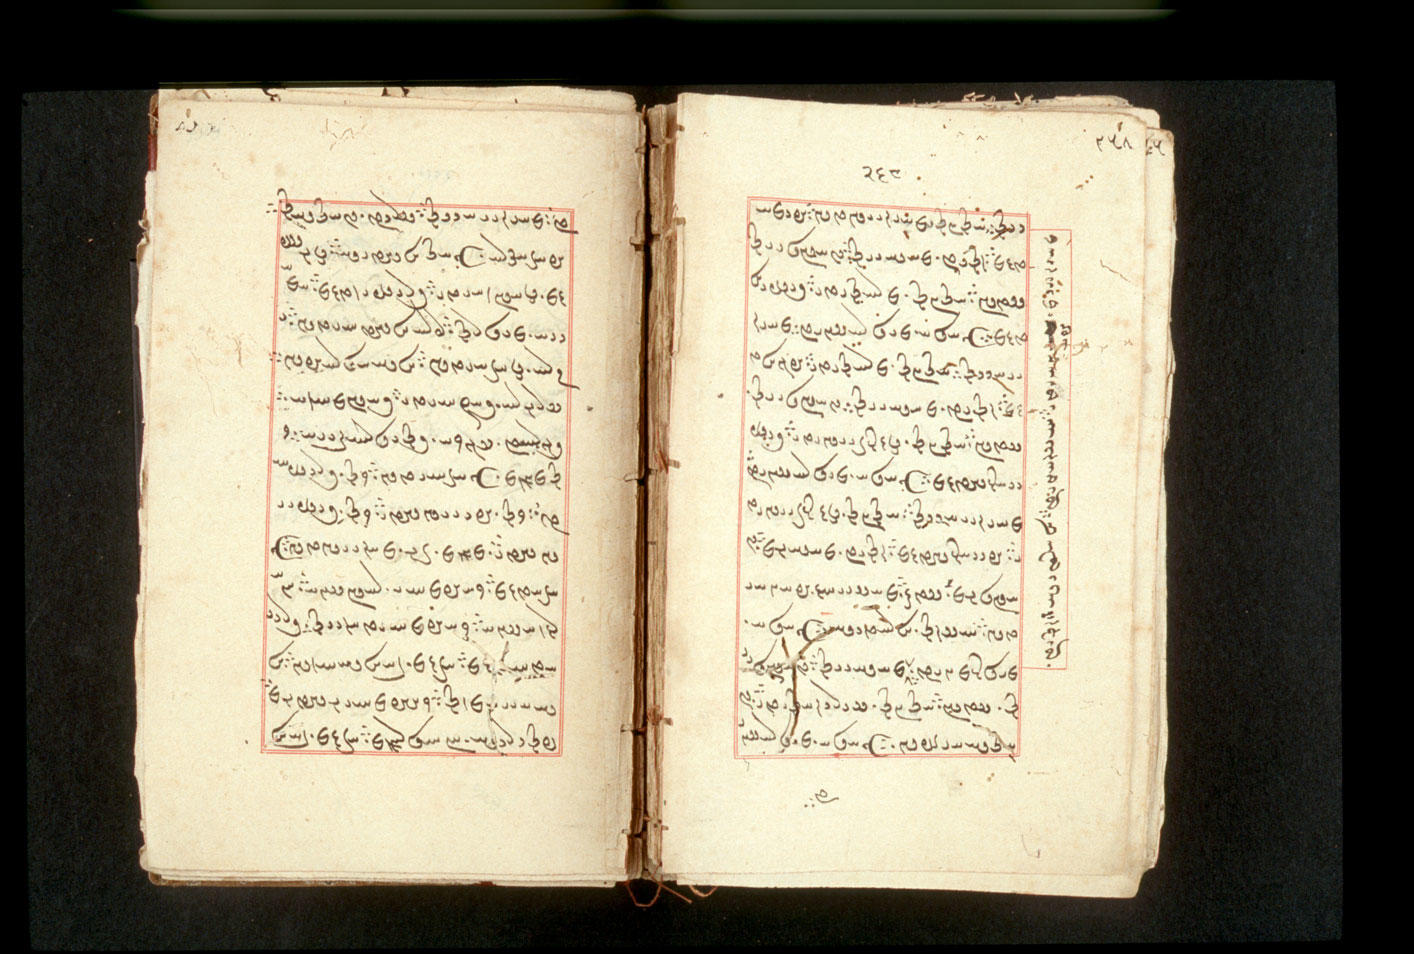 Folios 268v (right) and 269r (left)